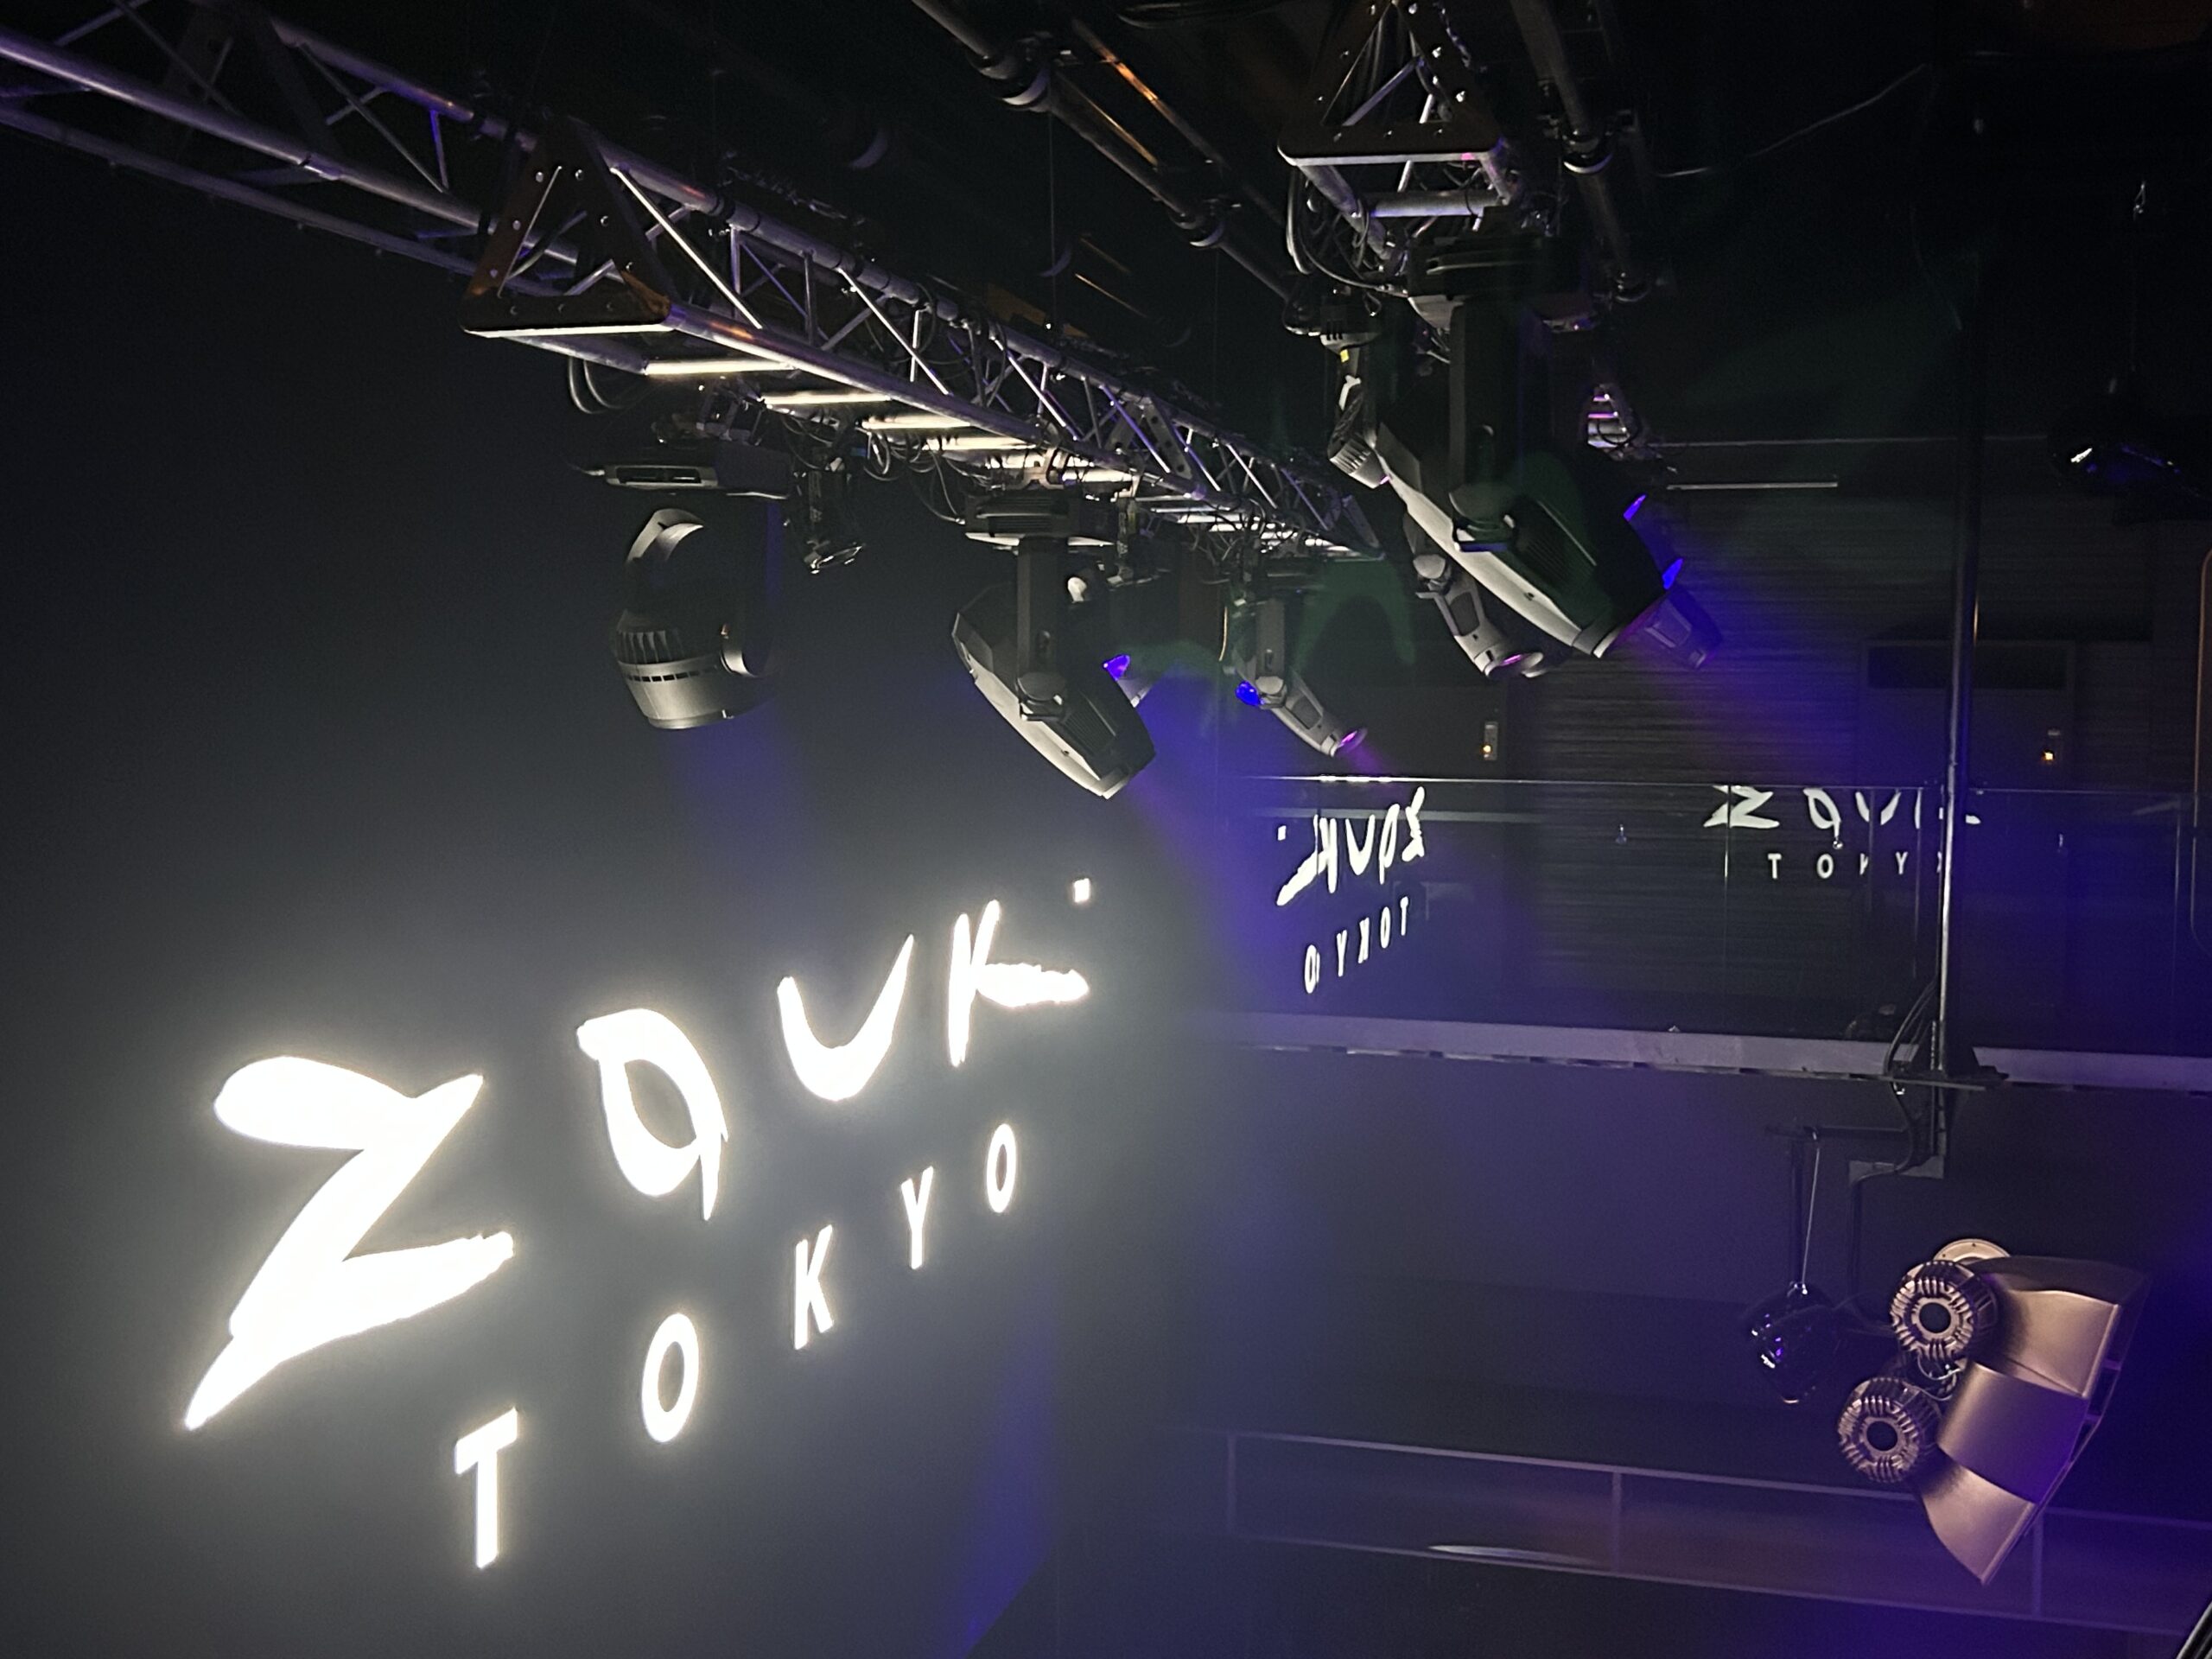 Reference Zouk Tokyo